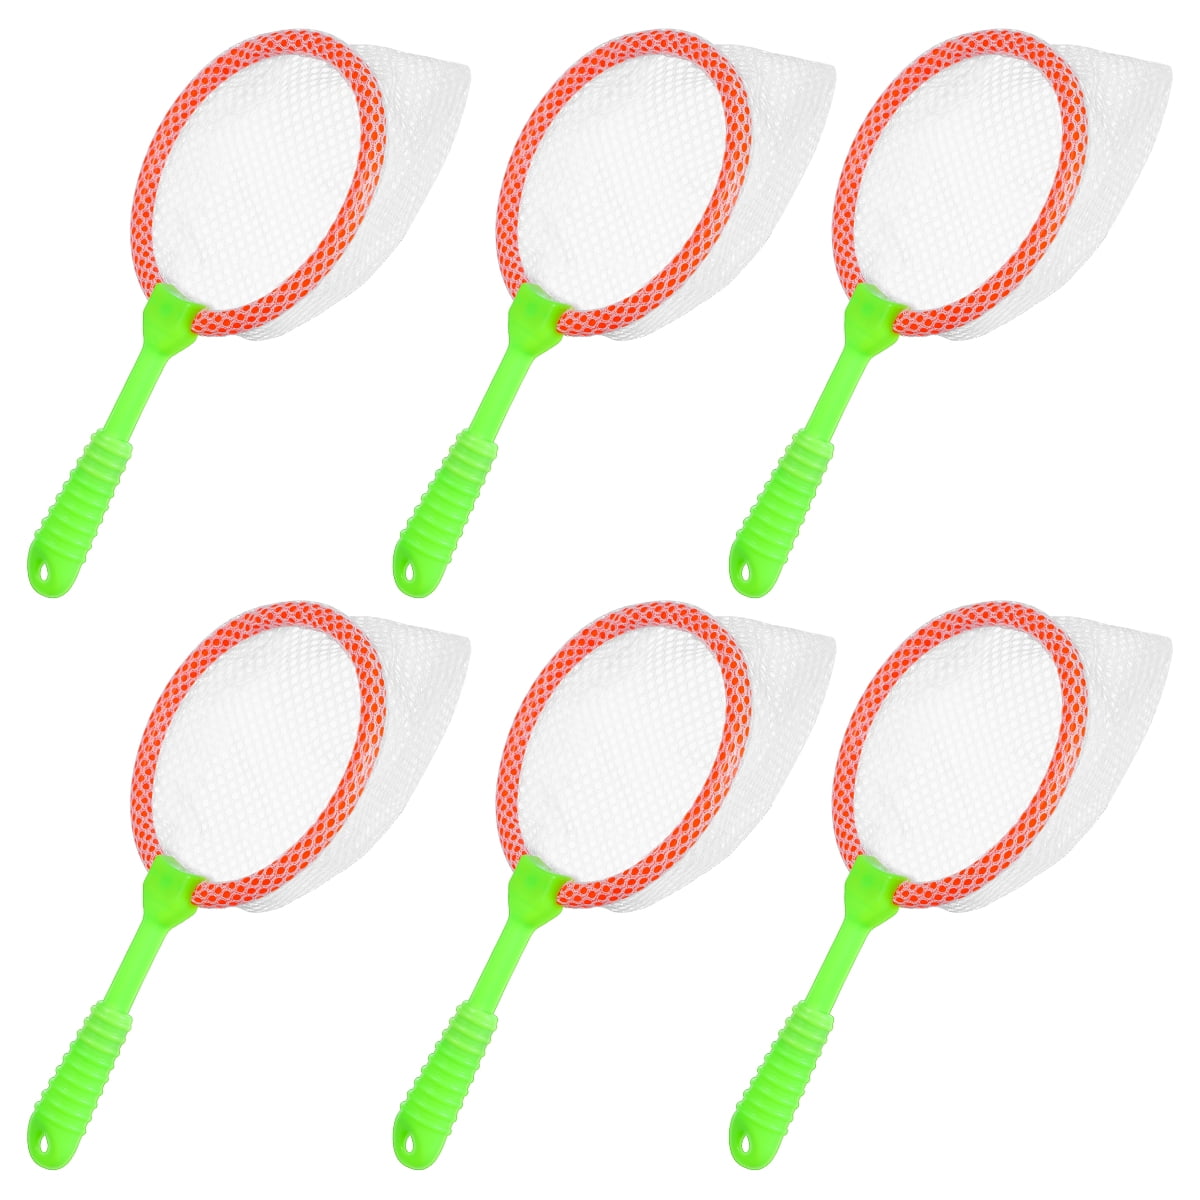 6Pcs Bug Catcher Net Insects Collecting Net Catching Set Toy for Children 